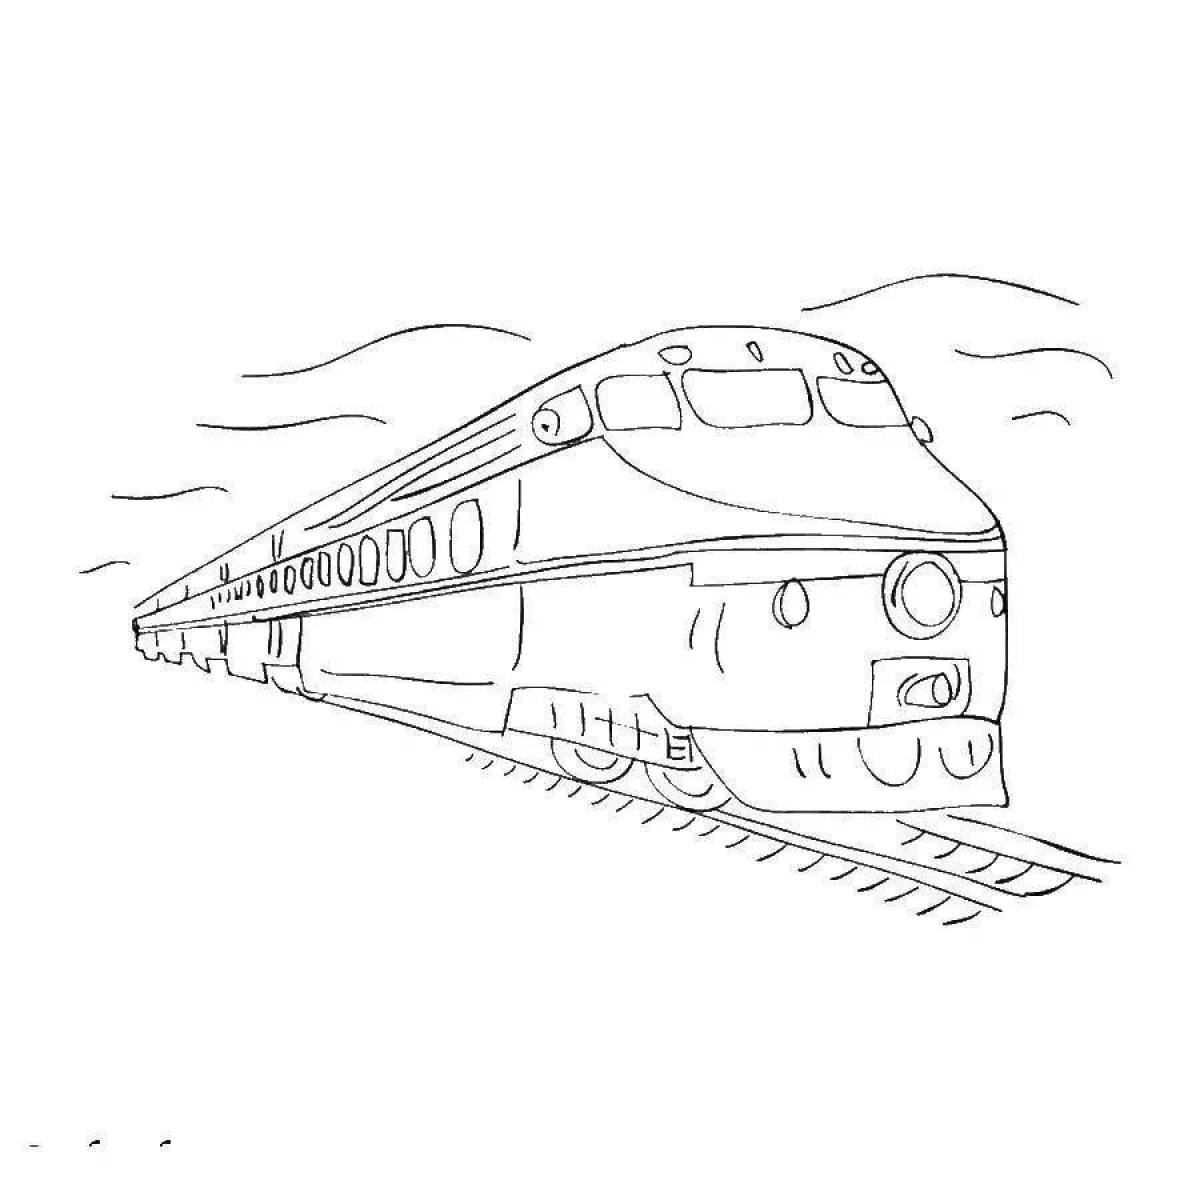 Coloring book glowing electric train